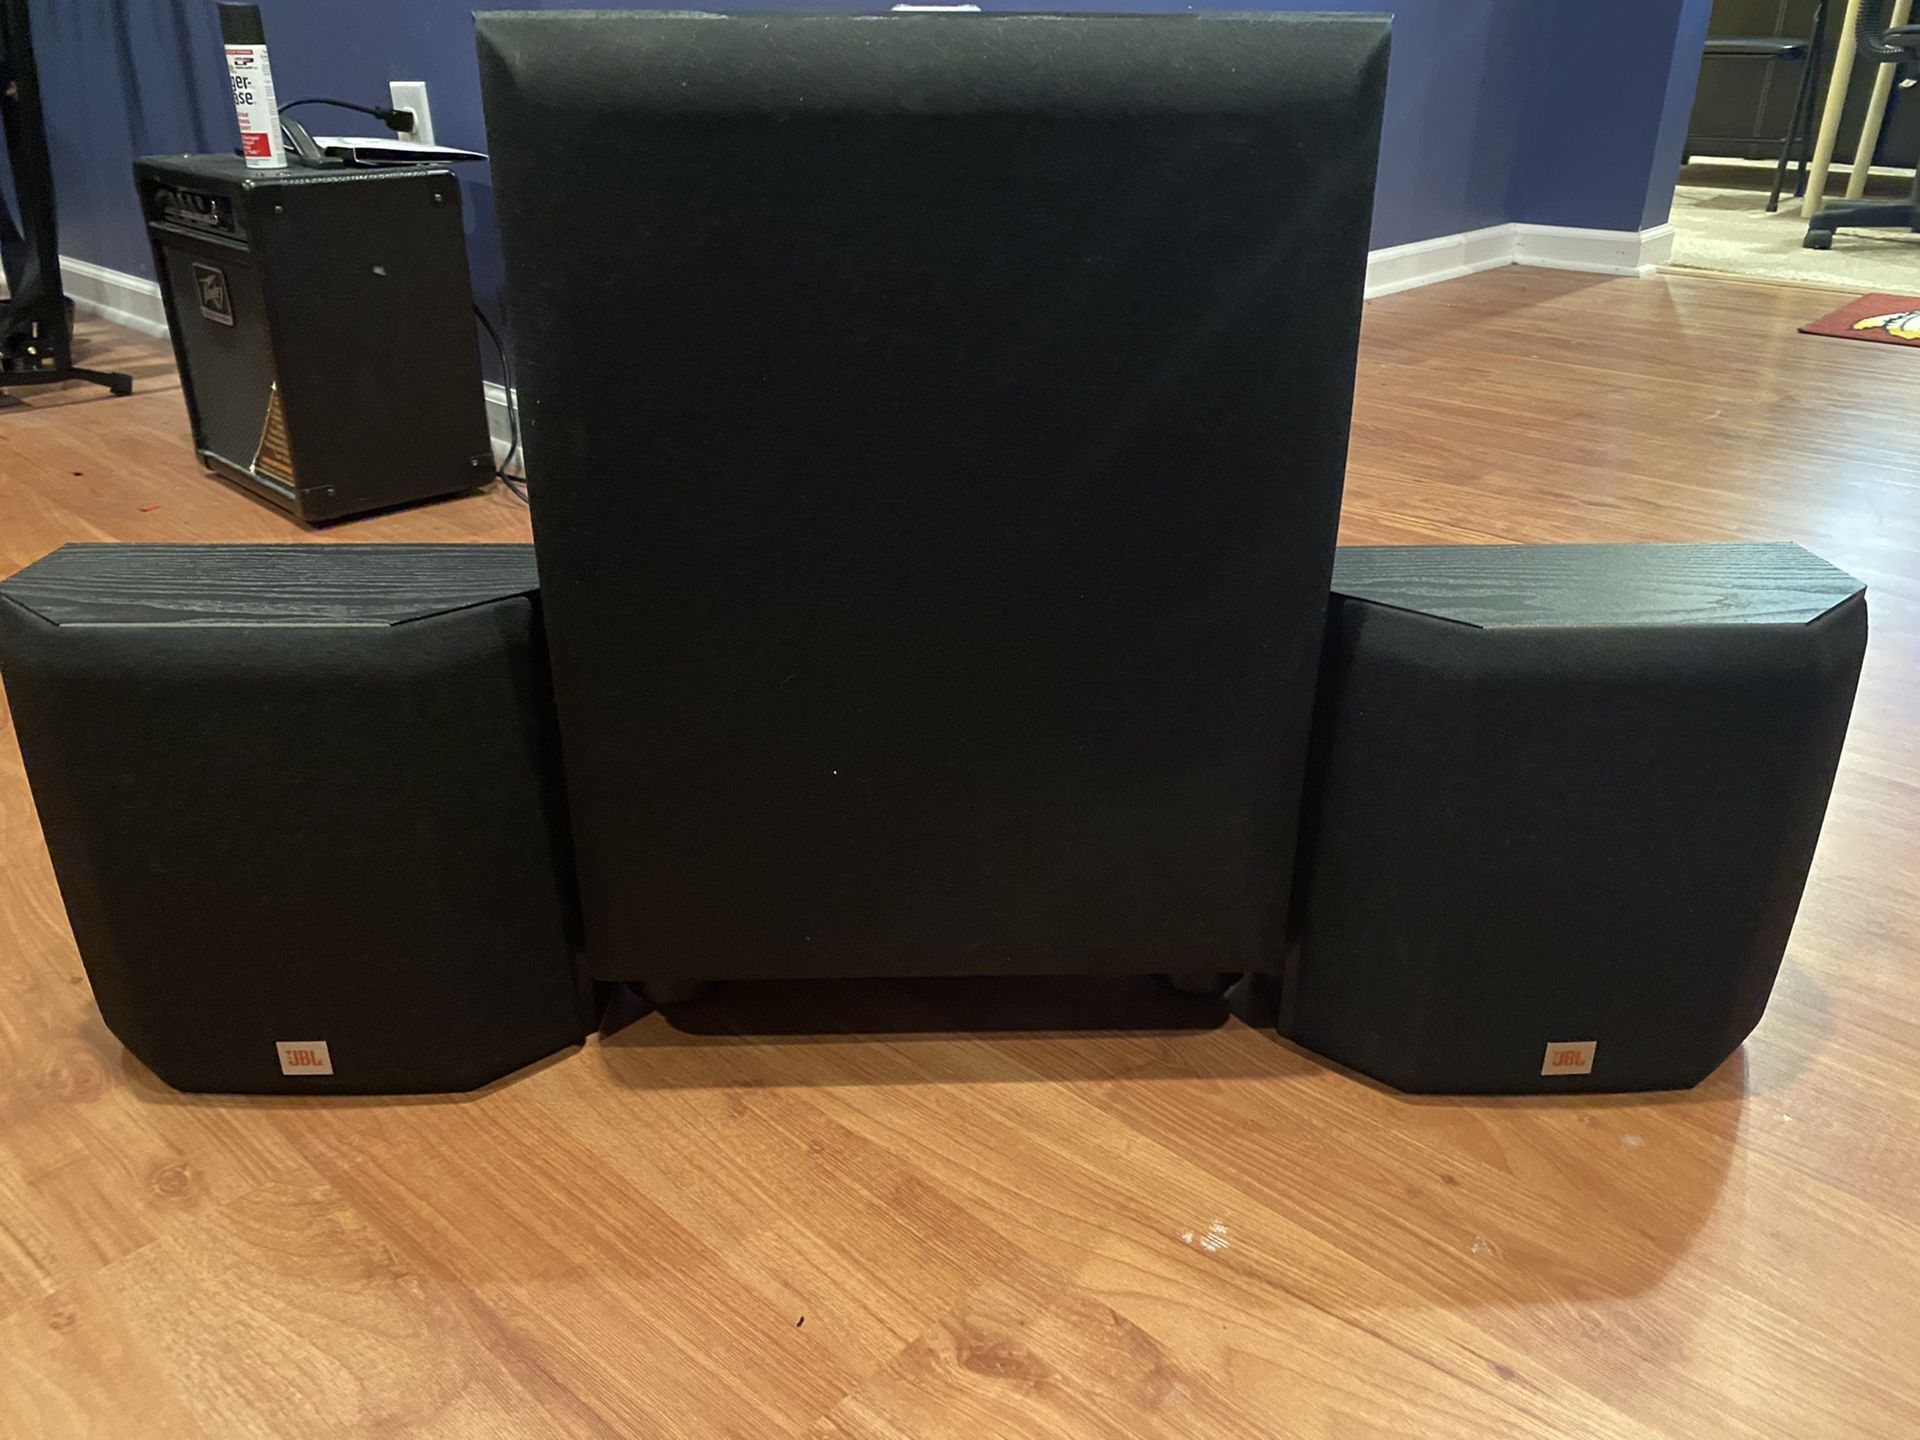 JBL Northridge E10 Series(Mains&Sub) for Sale in Charlotte, NC OfferUp